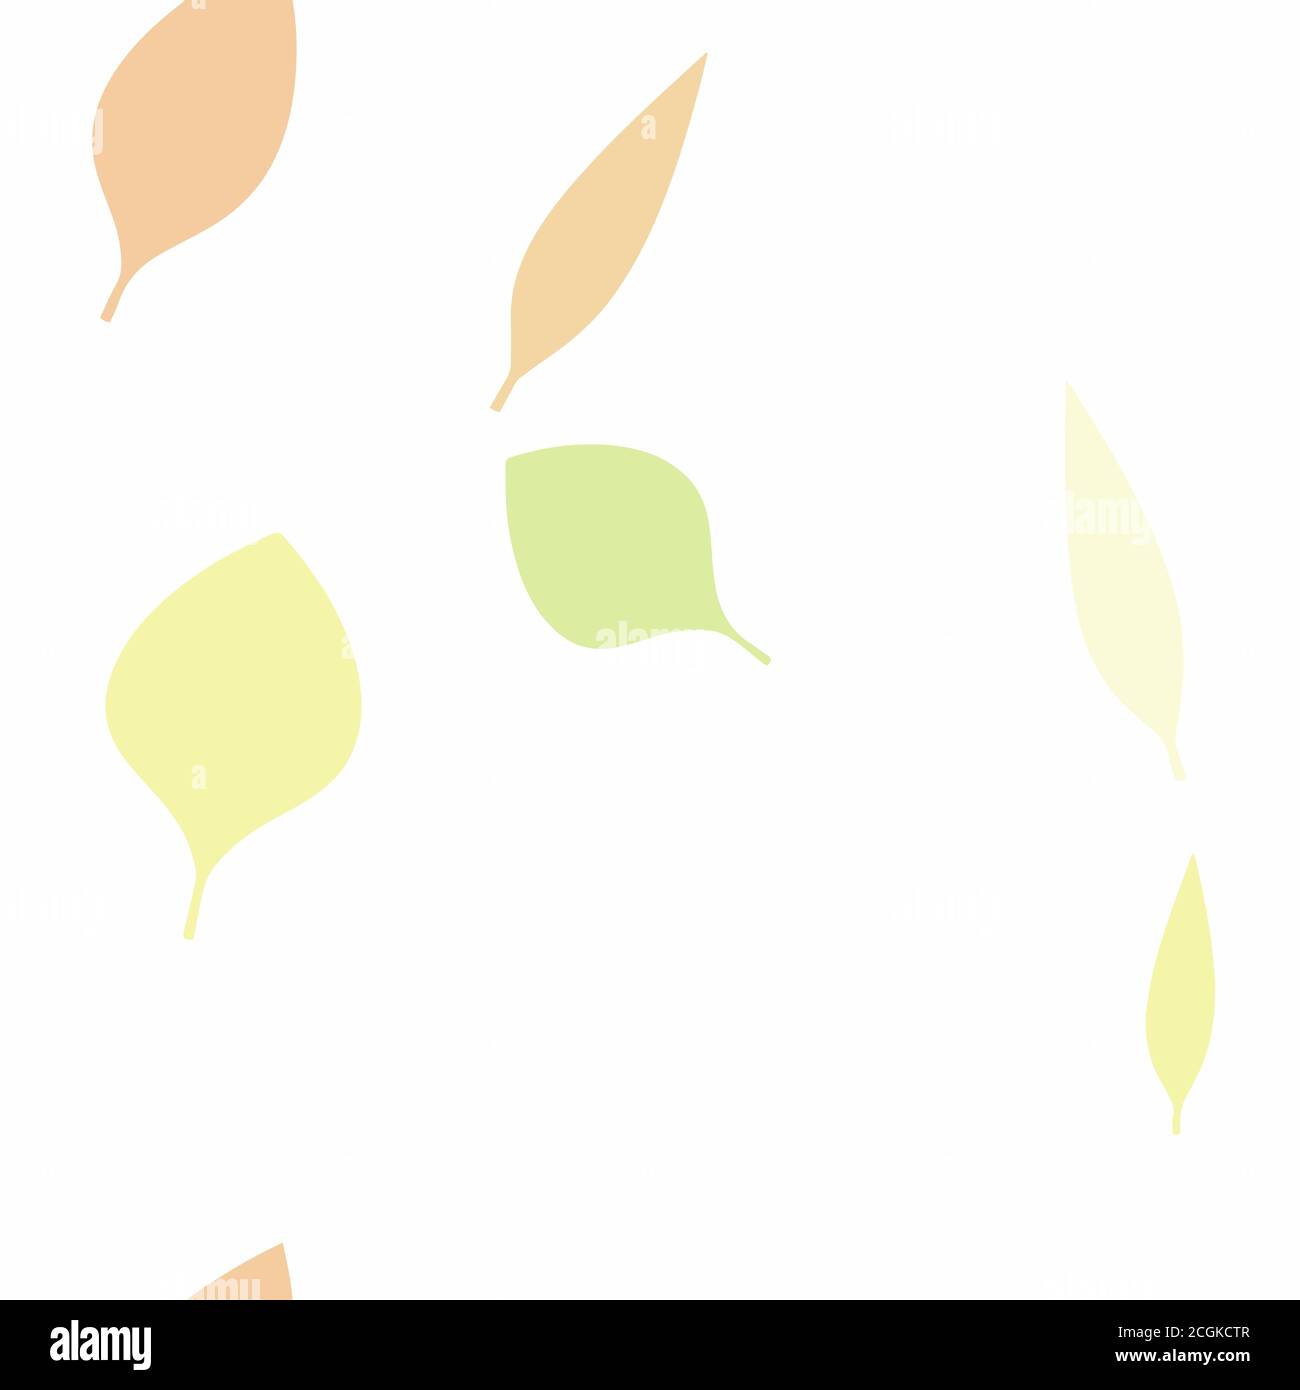 Fall Leaves Seamless Vector Pattern - Repeating ornament for textile, wraping paper, fashion etc. Stock Vector